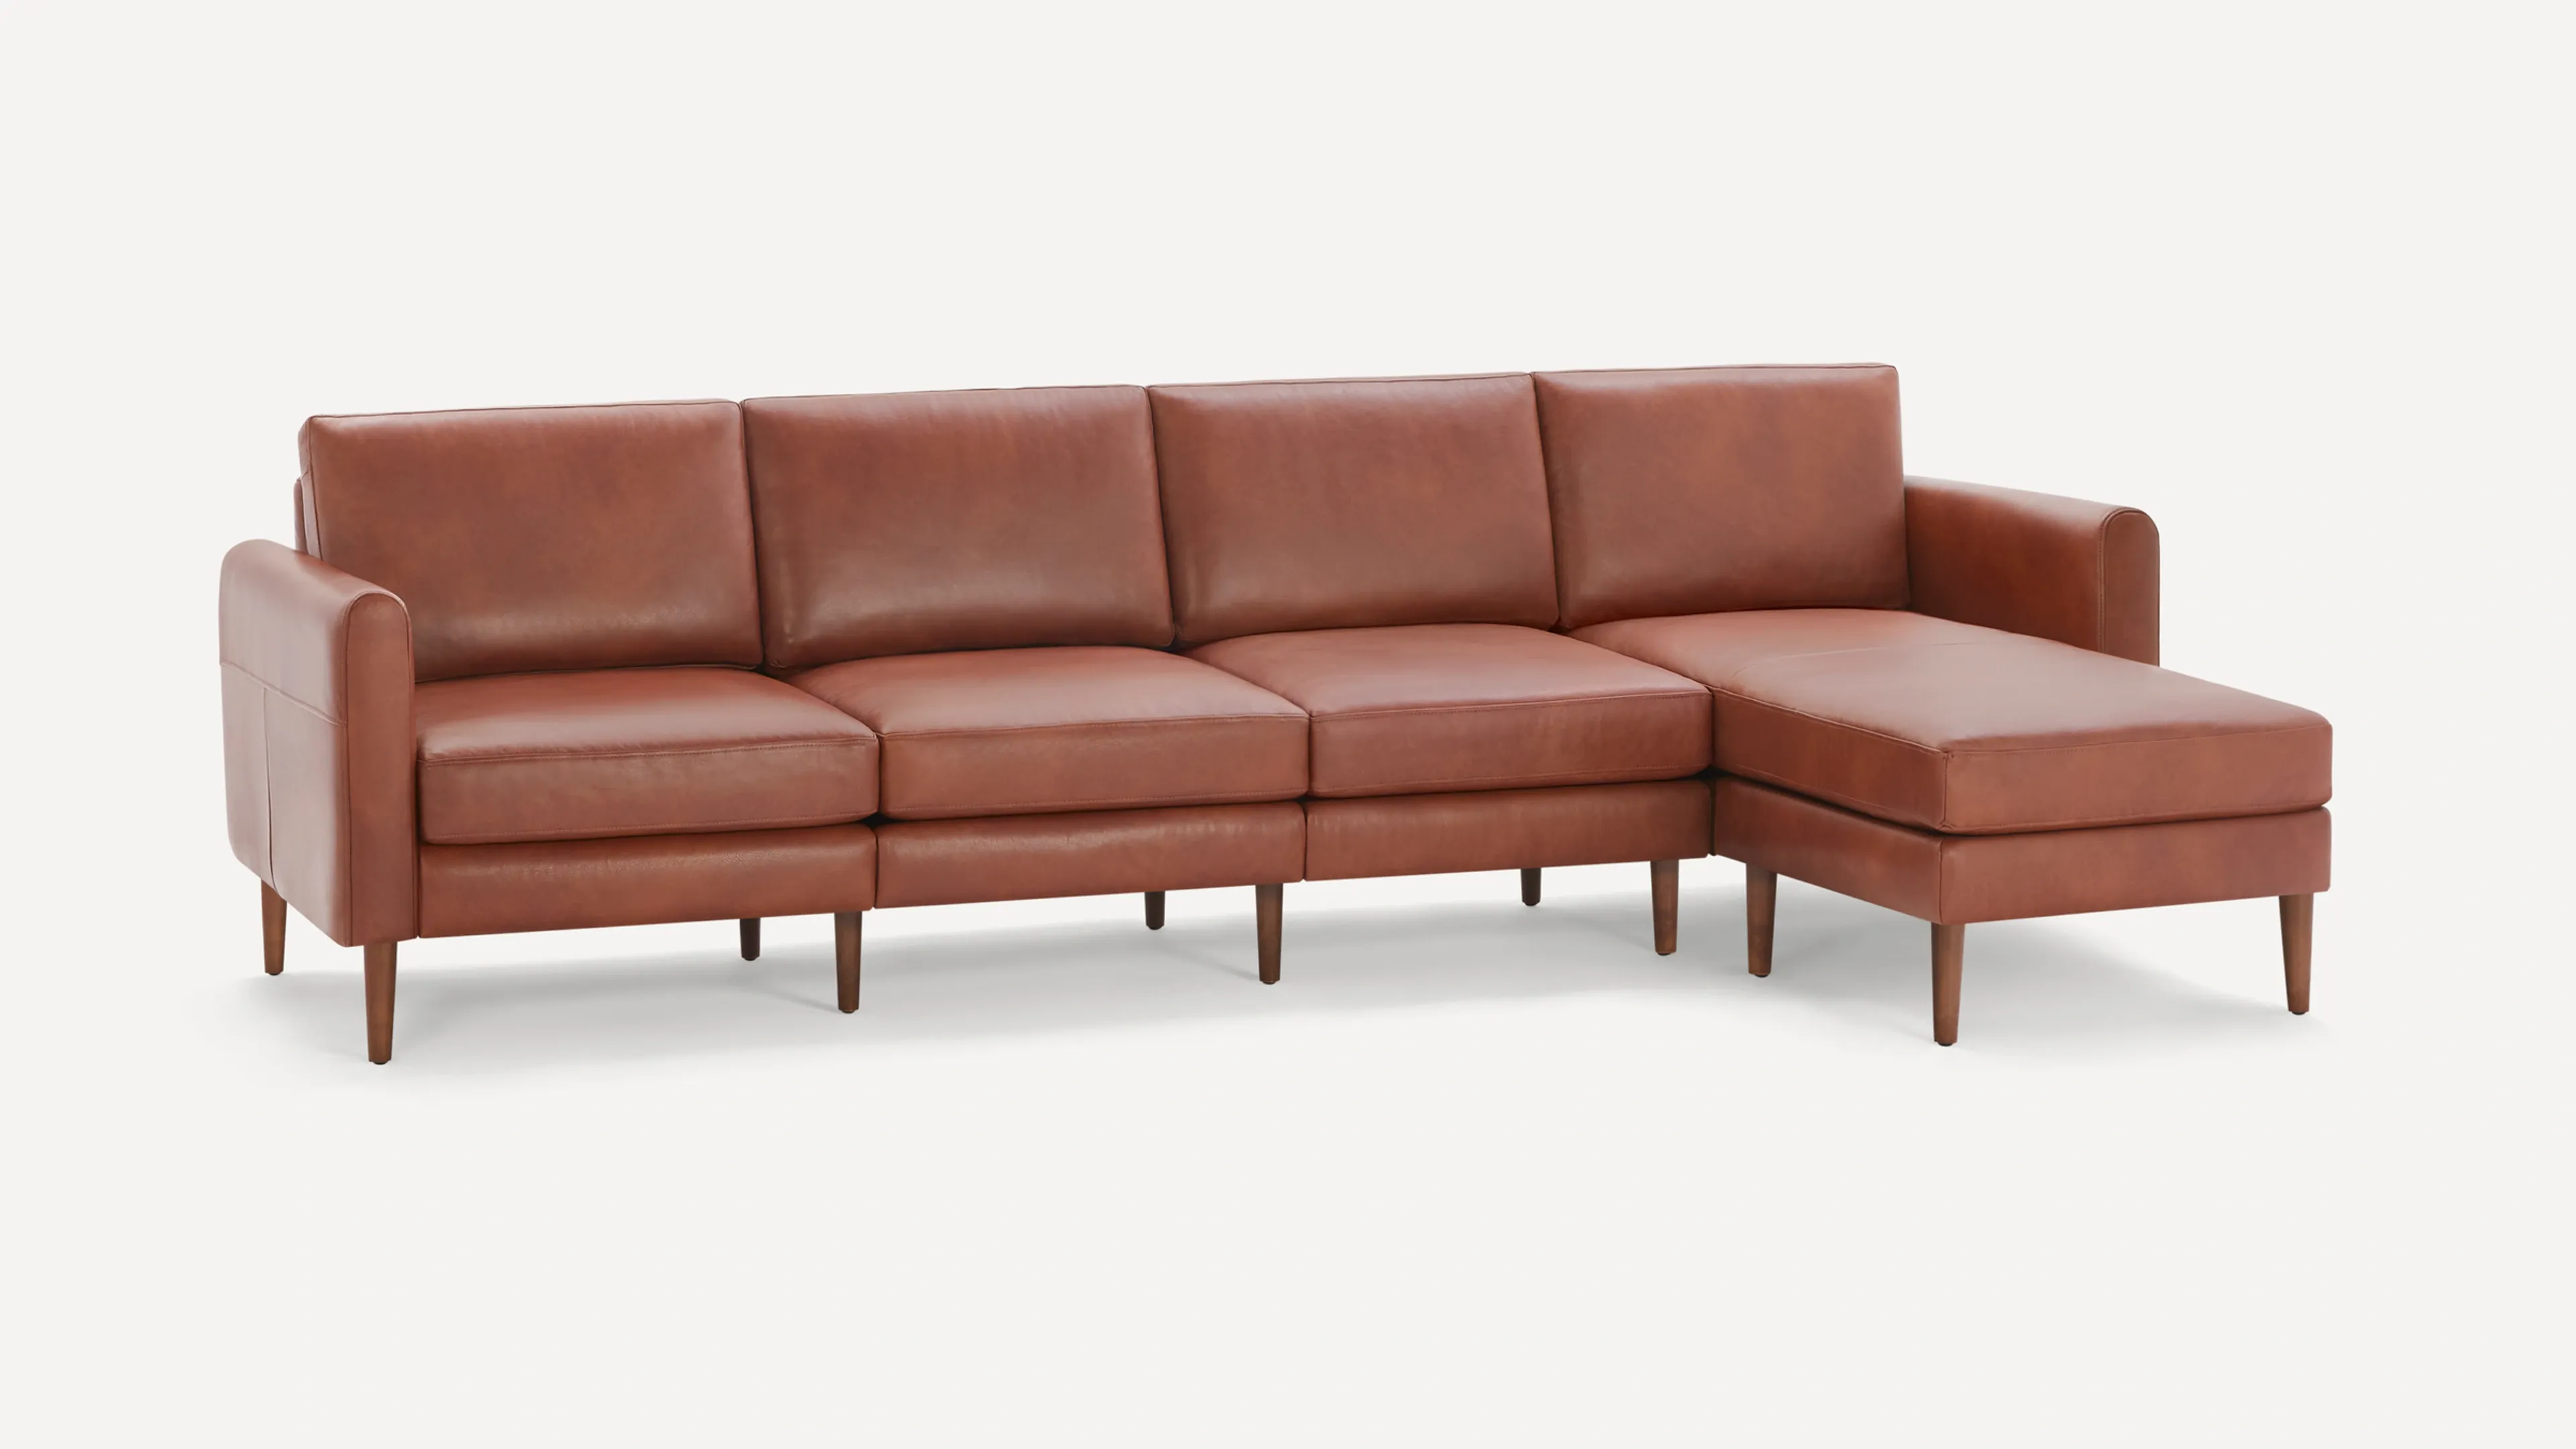 Original Nomad Chaise King Sofa in Chestnut Leather